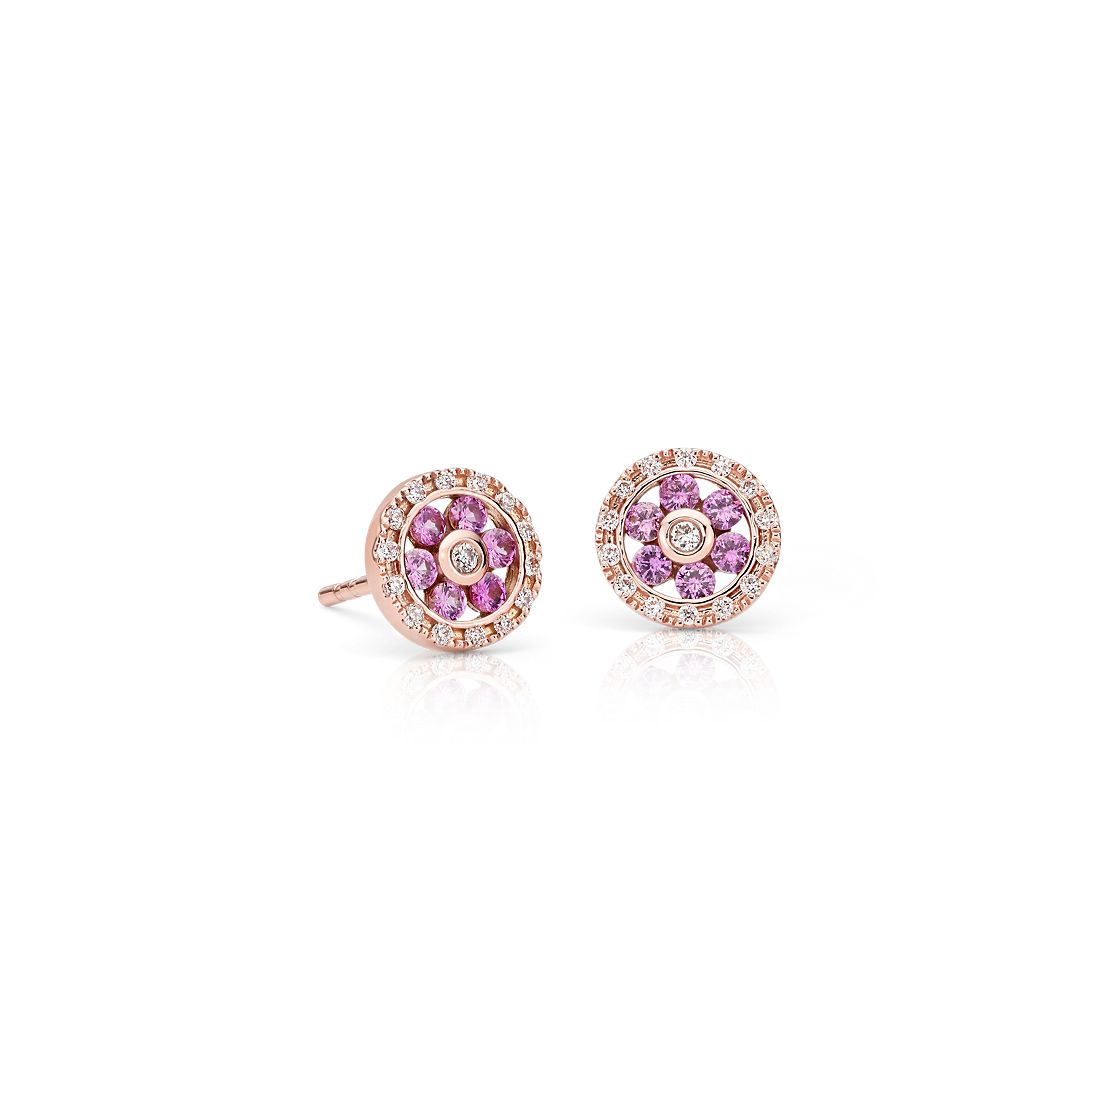 Gemstone Jewellery Excellent Cut Pink Sapphire Heart Minnie Mouse Earrings In 14k Yellow Gold Filled